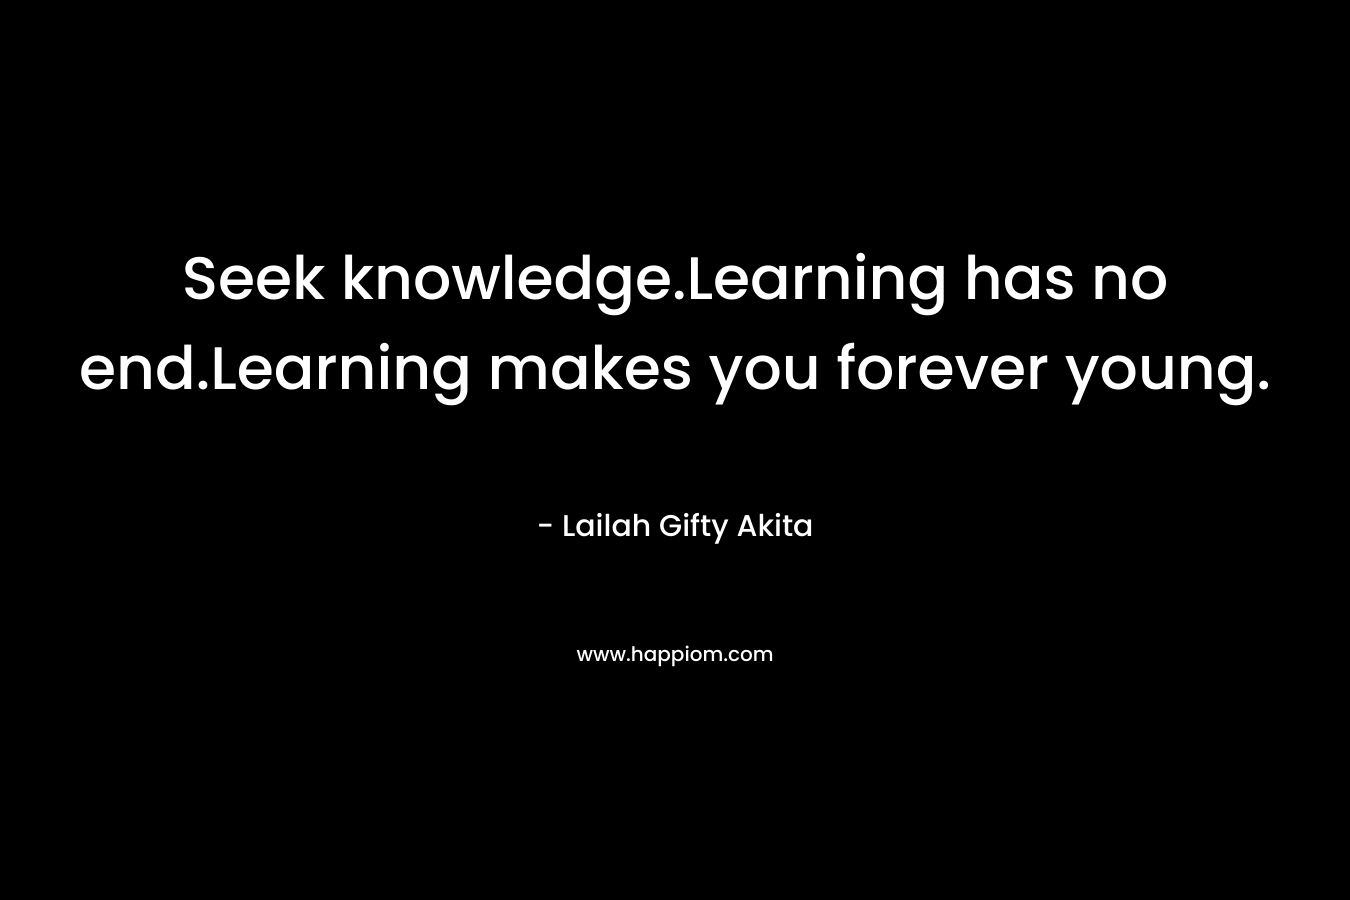 Seek knowledge.Learning has no end.Learning makes you forever young.